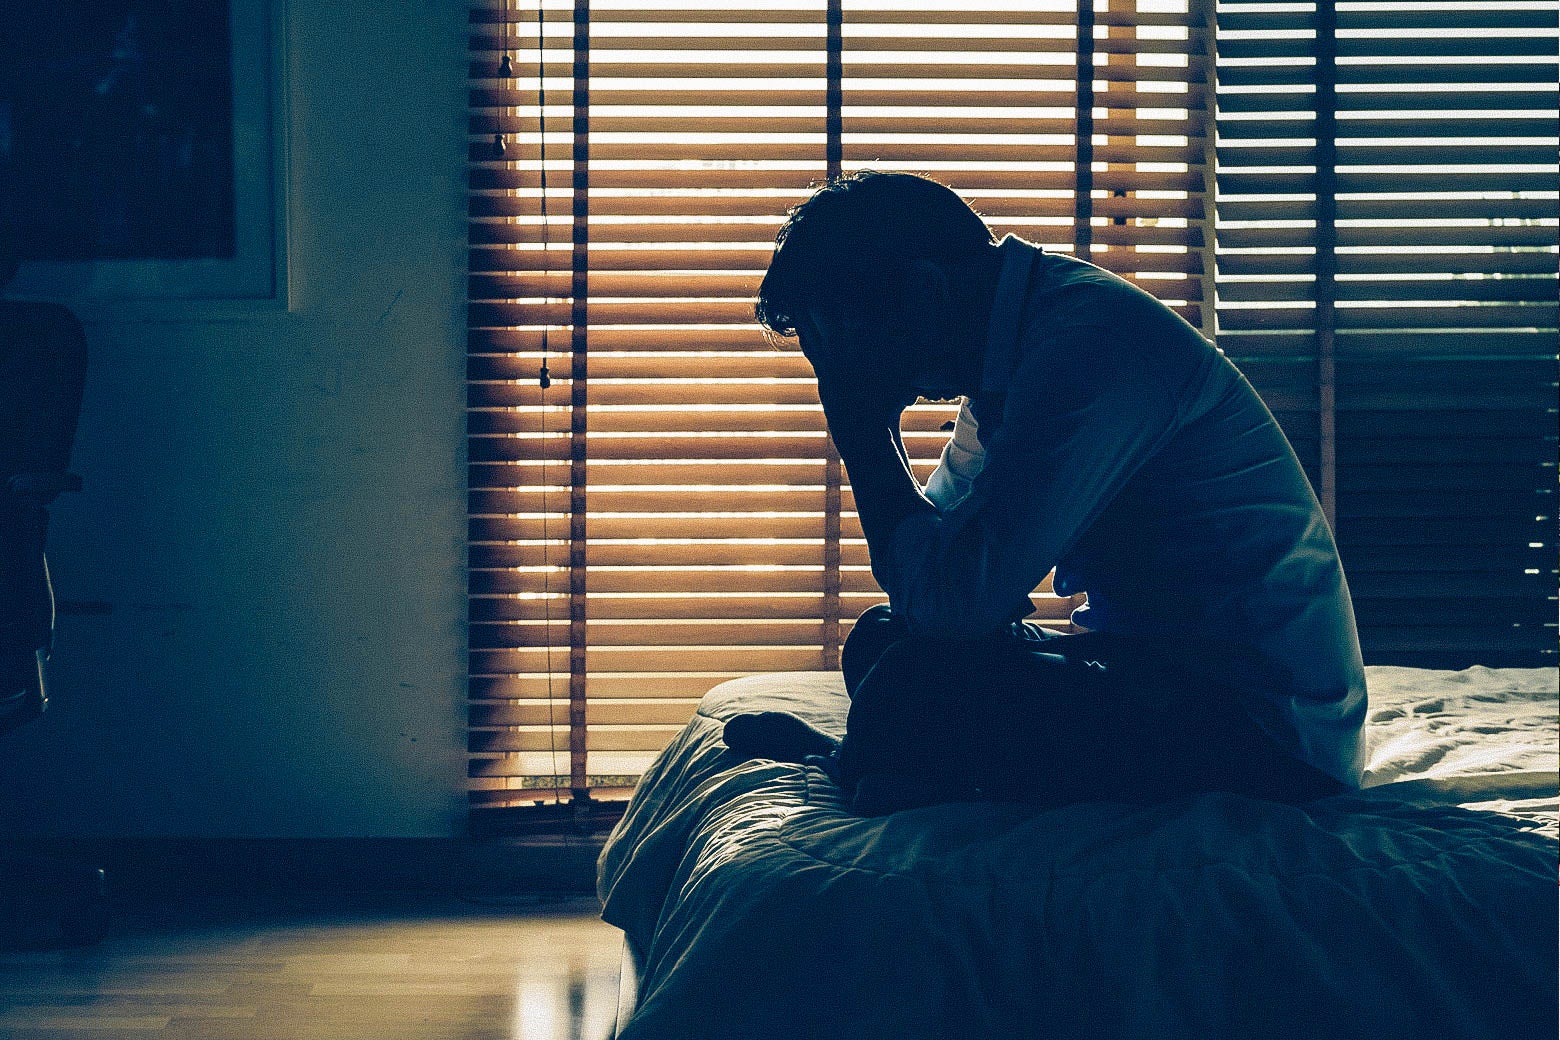 Stock image of a man sitting on a bed, holding his head with one hand despondently.